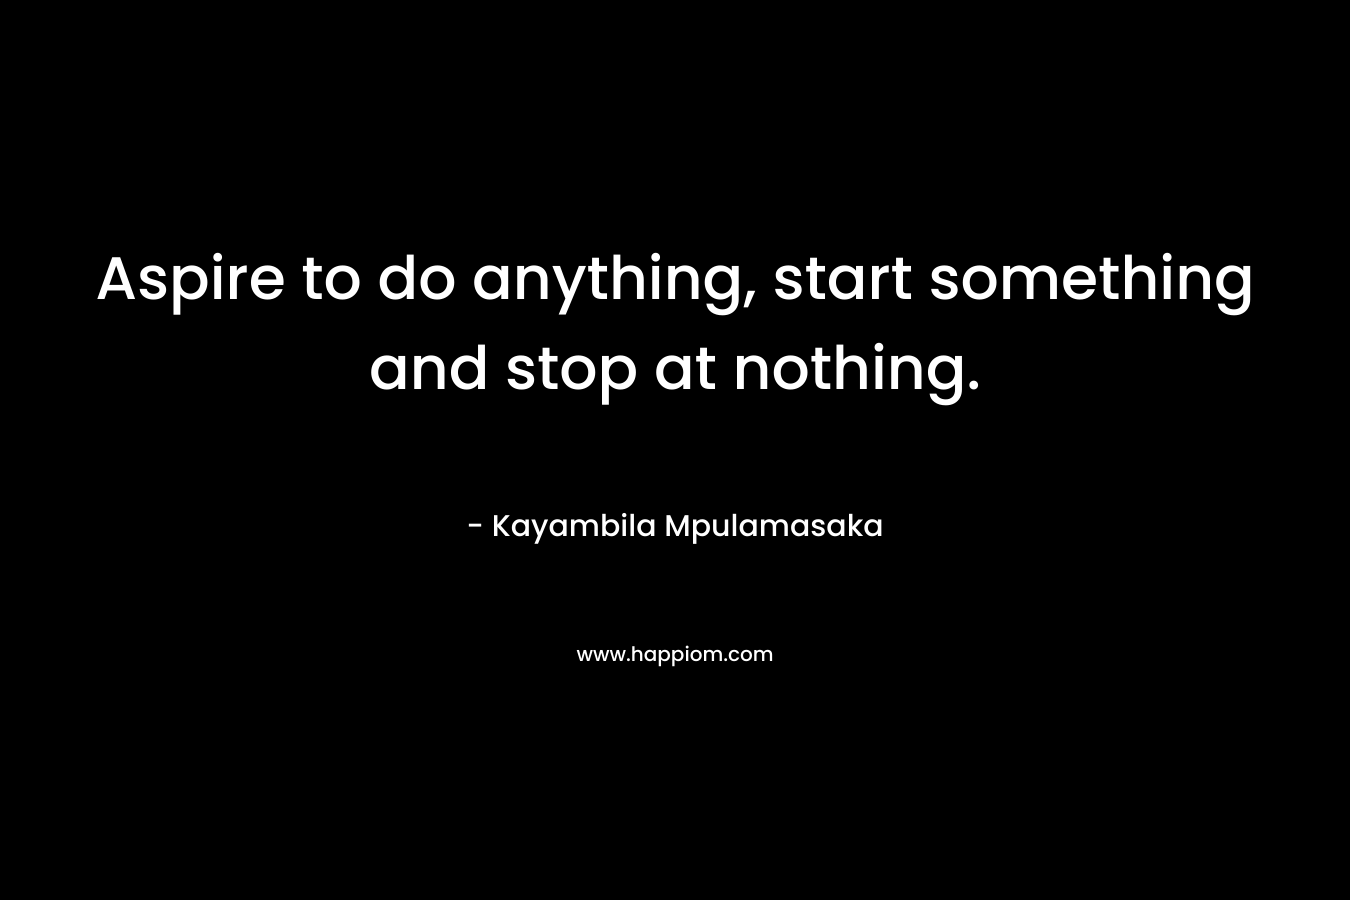 Aspire to do anything, start something and stop at nothing.